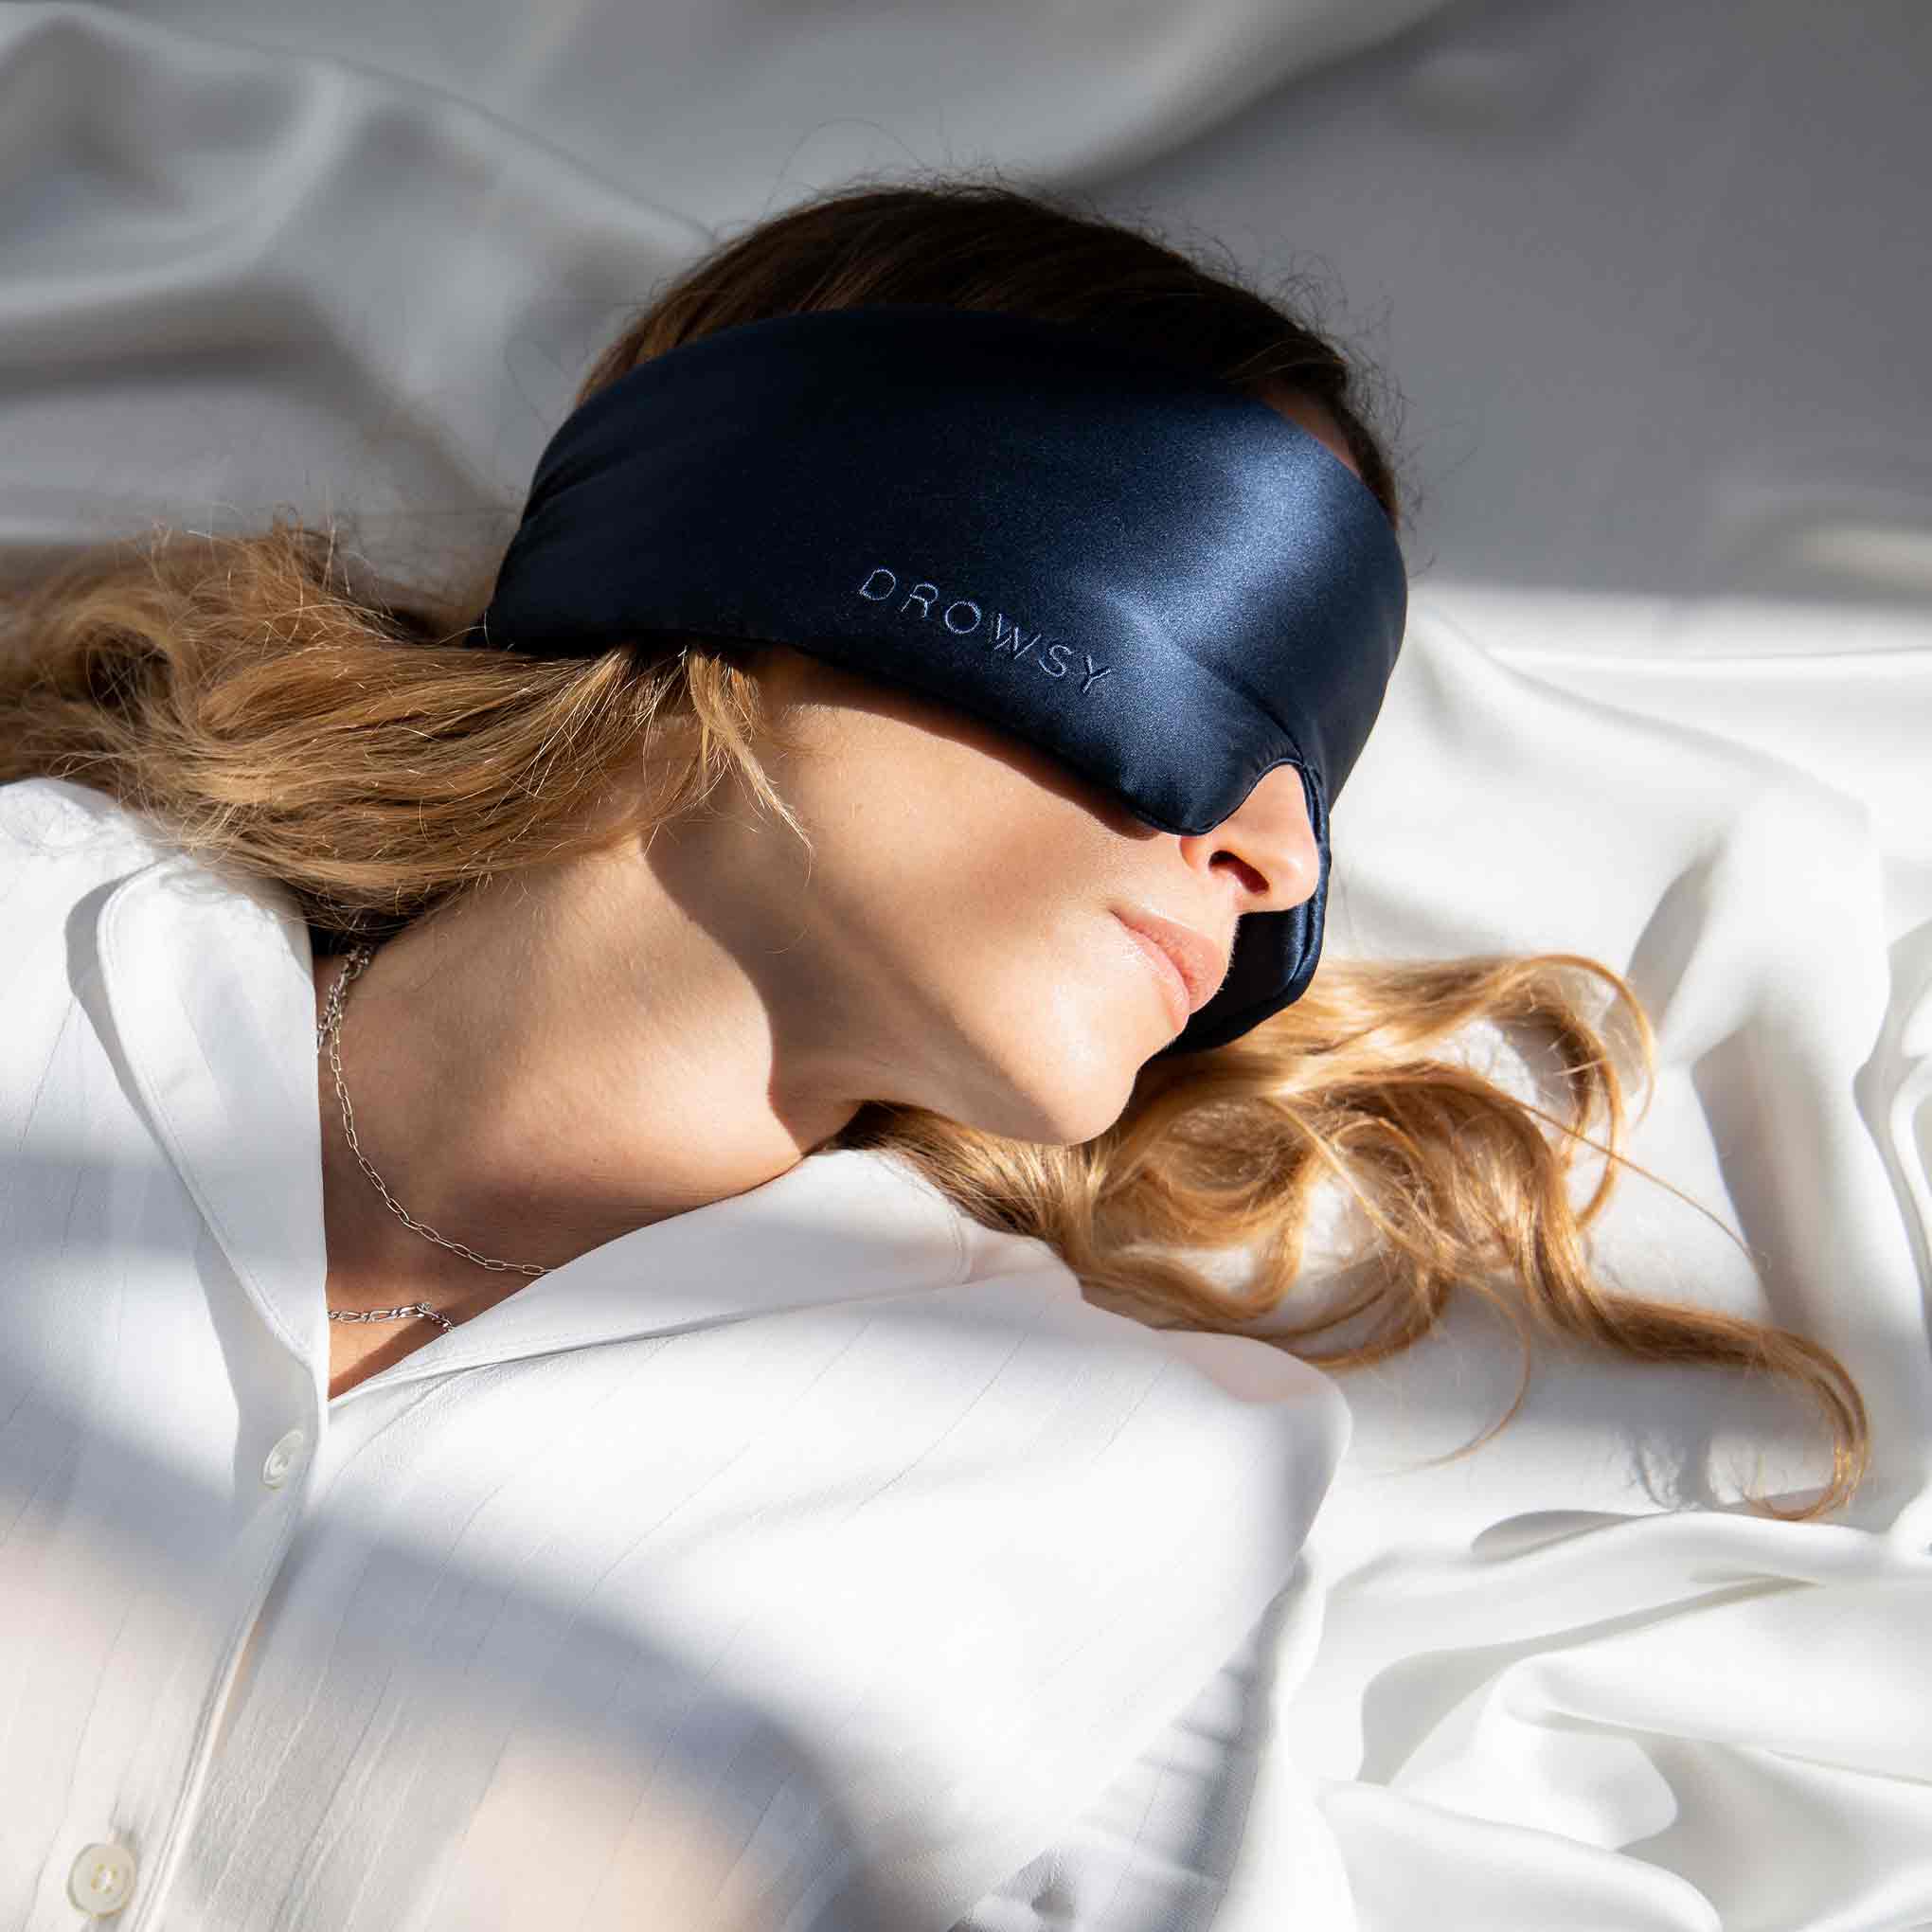 Model sleeping in the sunlight with a Drowsy silk sleep mask covering her eyes